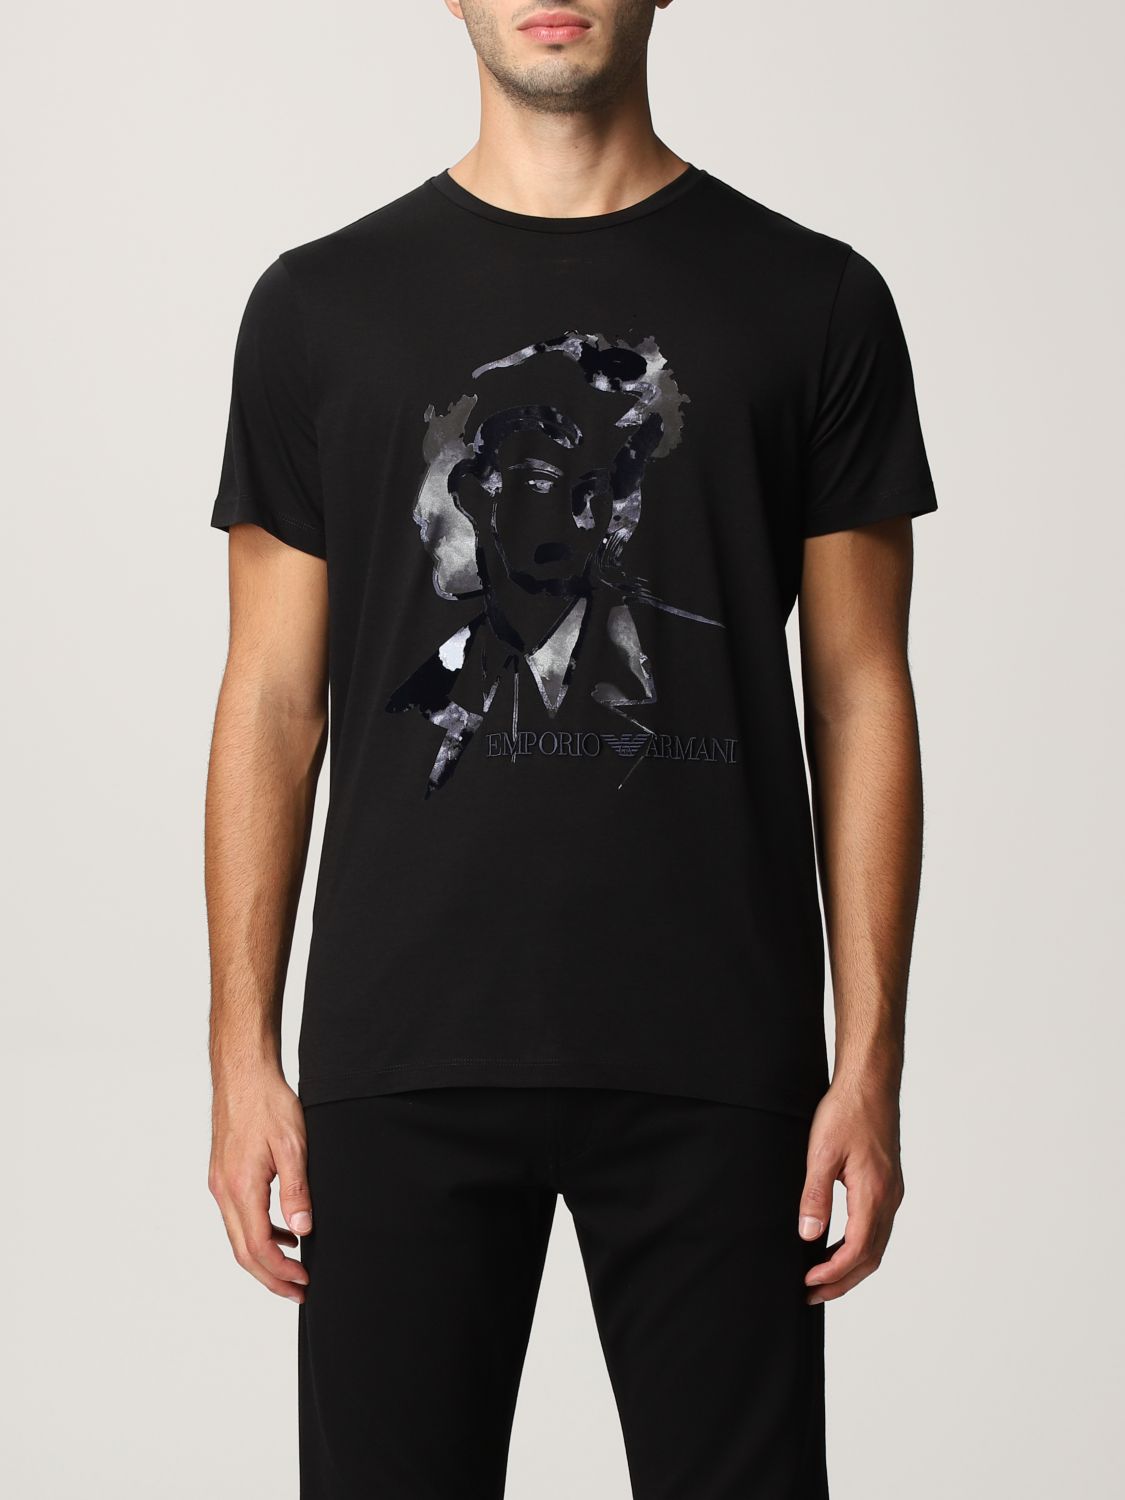 Mispend Match Udfyld EMPORIO ARMANI: T-shirt in cotton jersey with print and logo - Black | Emporio  Armani t-shirt 6K1T6S 1JQ4Z online on GIGLIO.COM